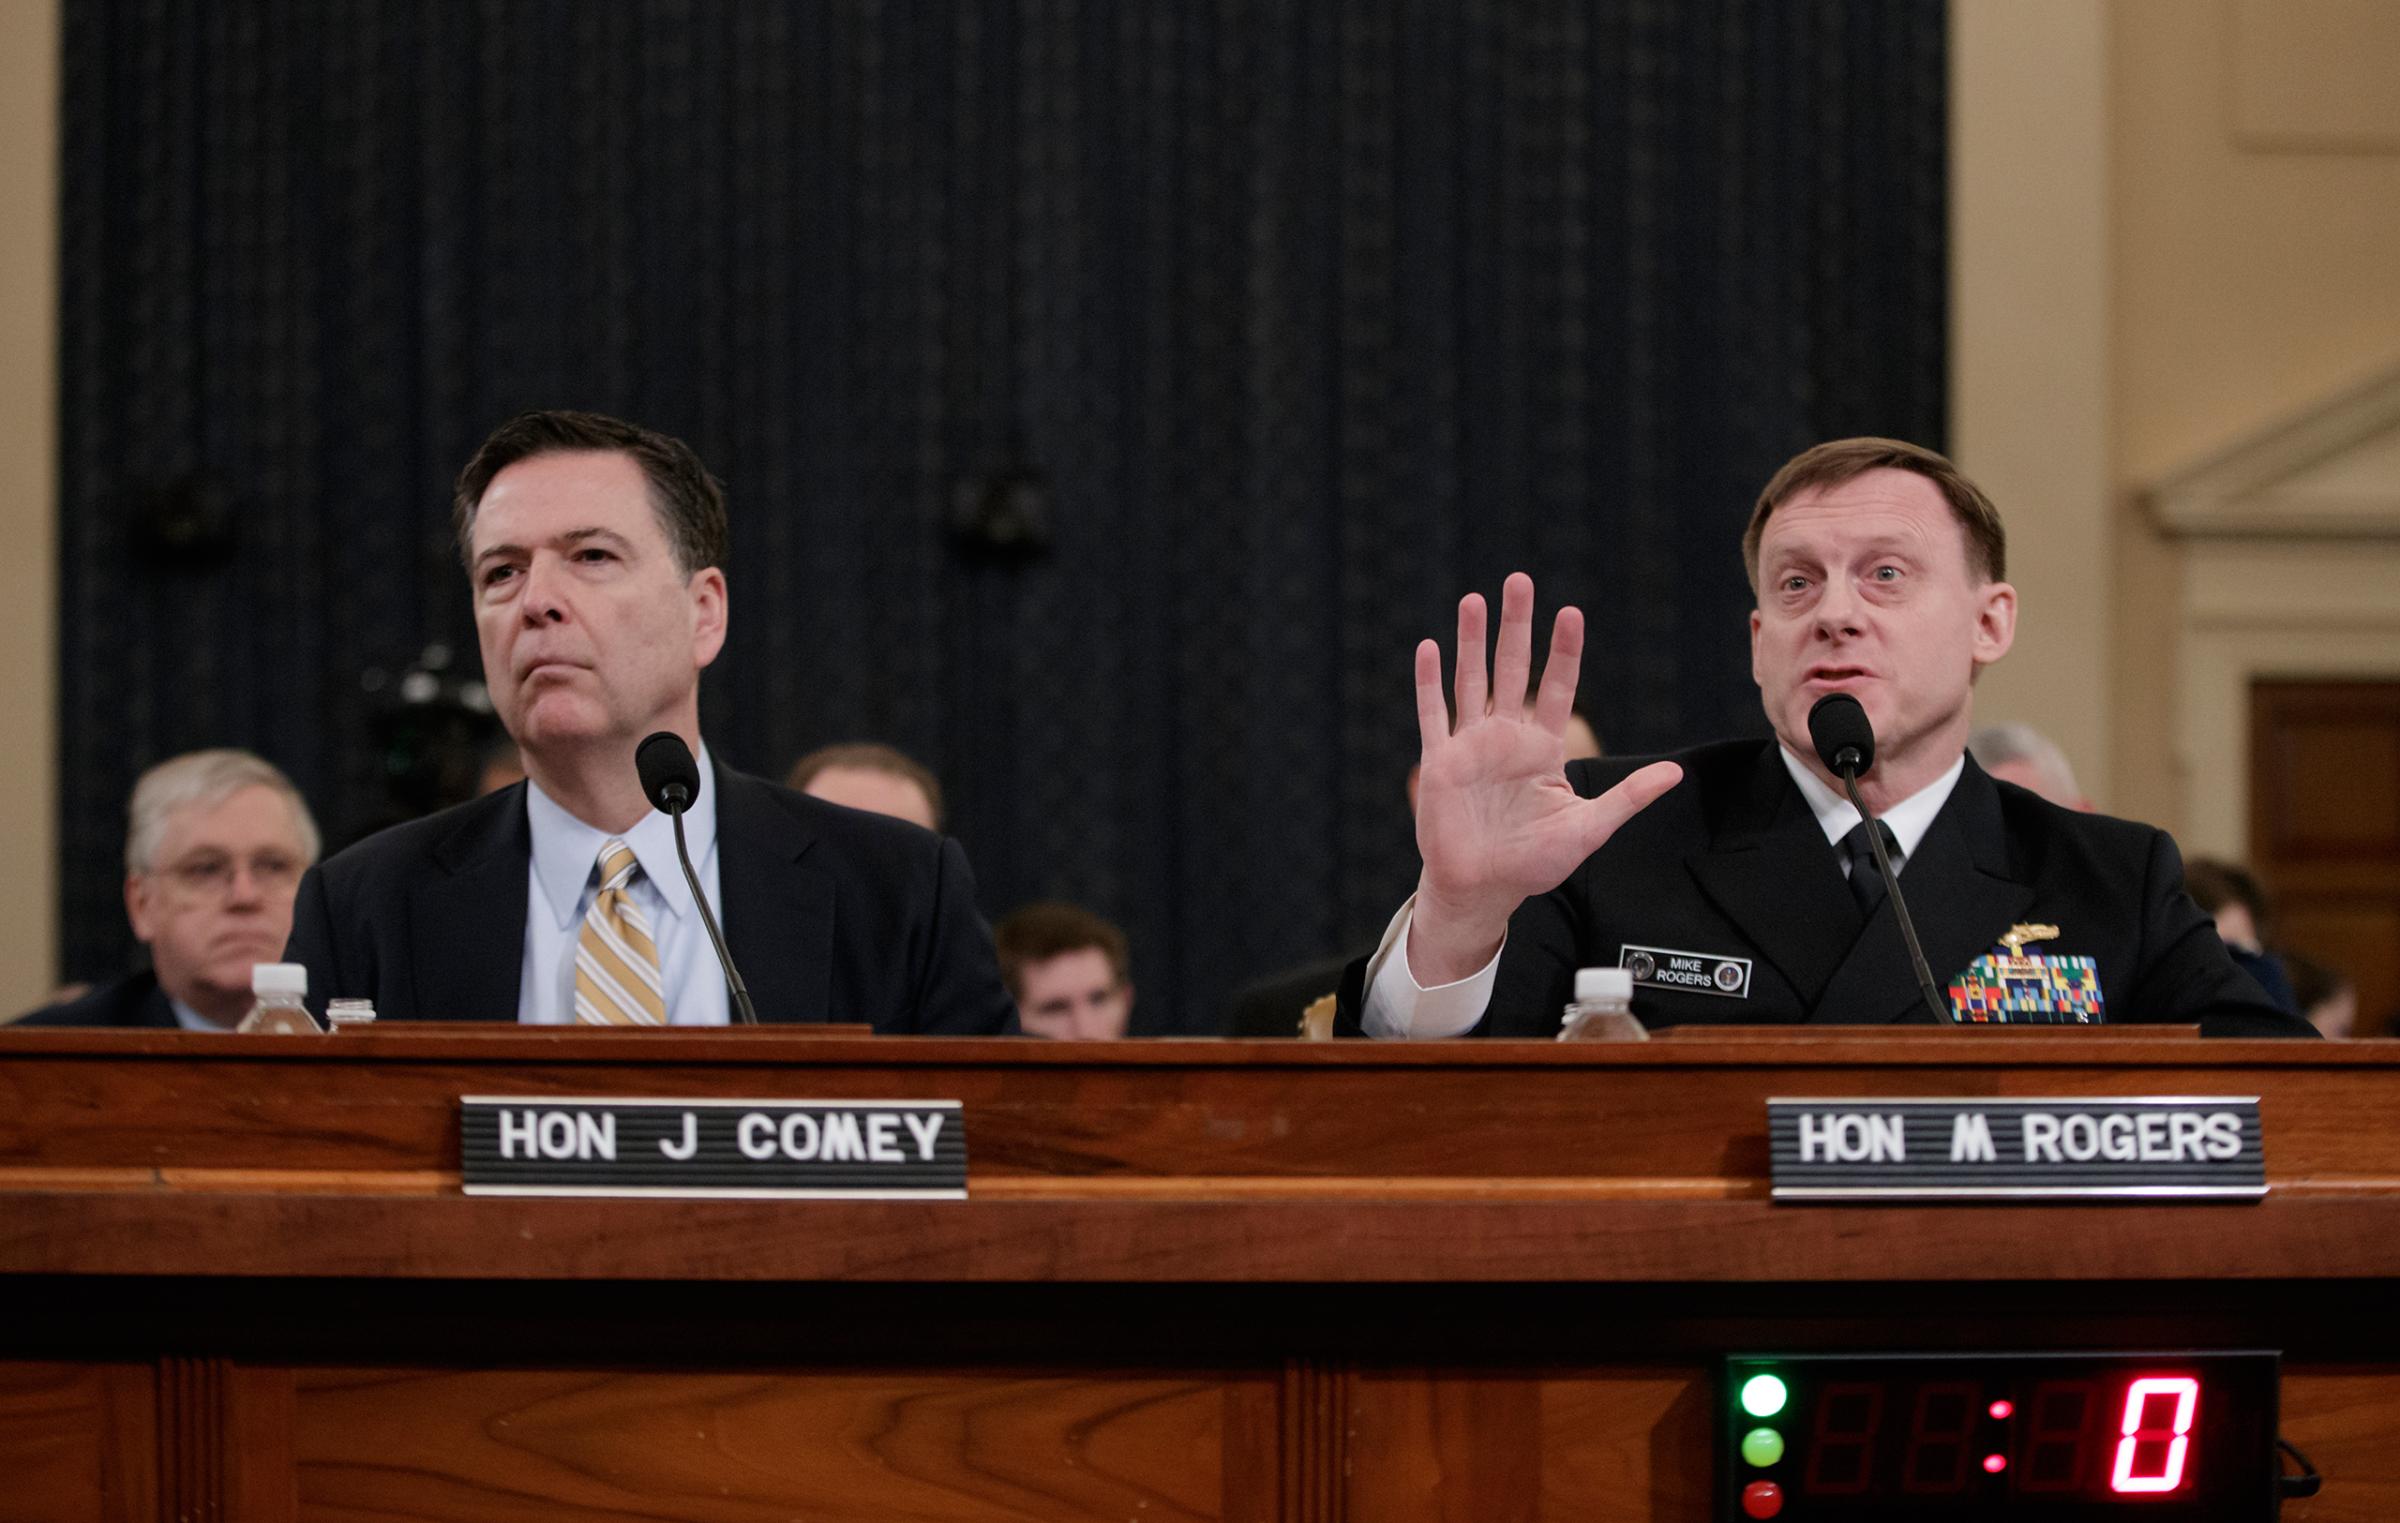 Both FBI Director Comey, left, and NSA chief Rogers said they could find no evidence for Trump's claims that Obama had bugged Trump's phone calls.